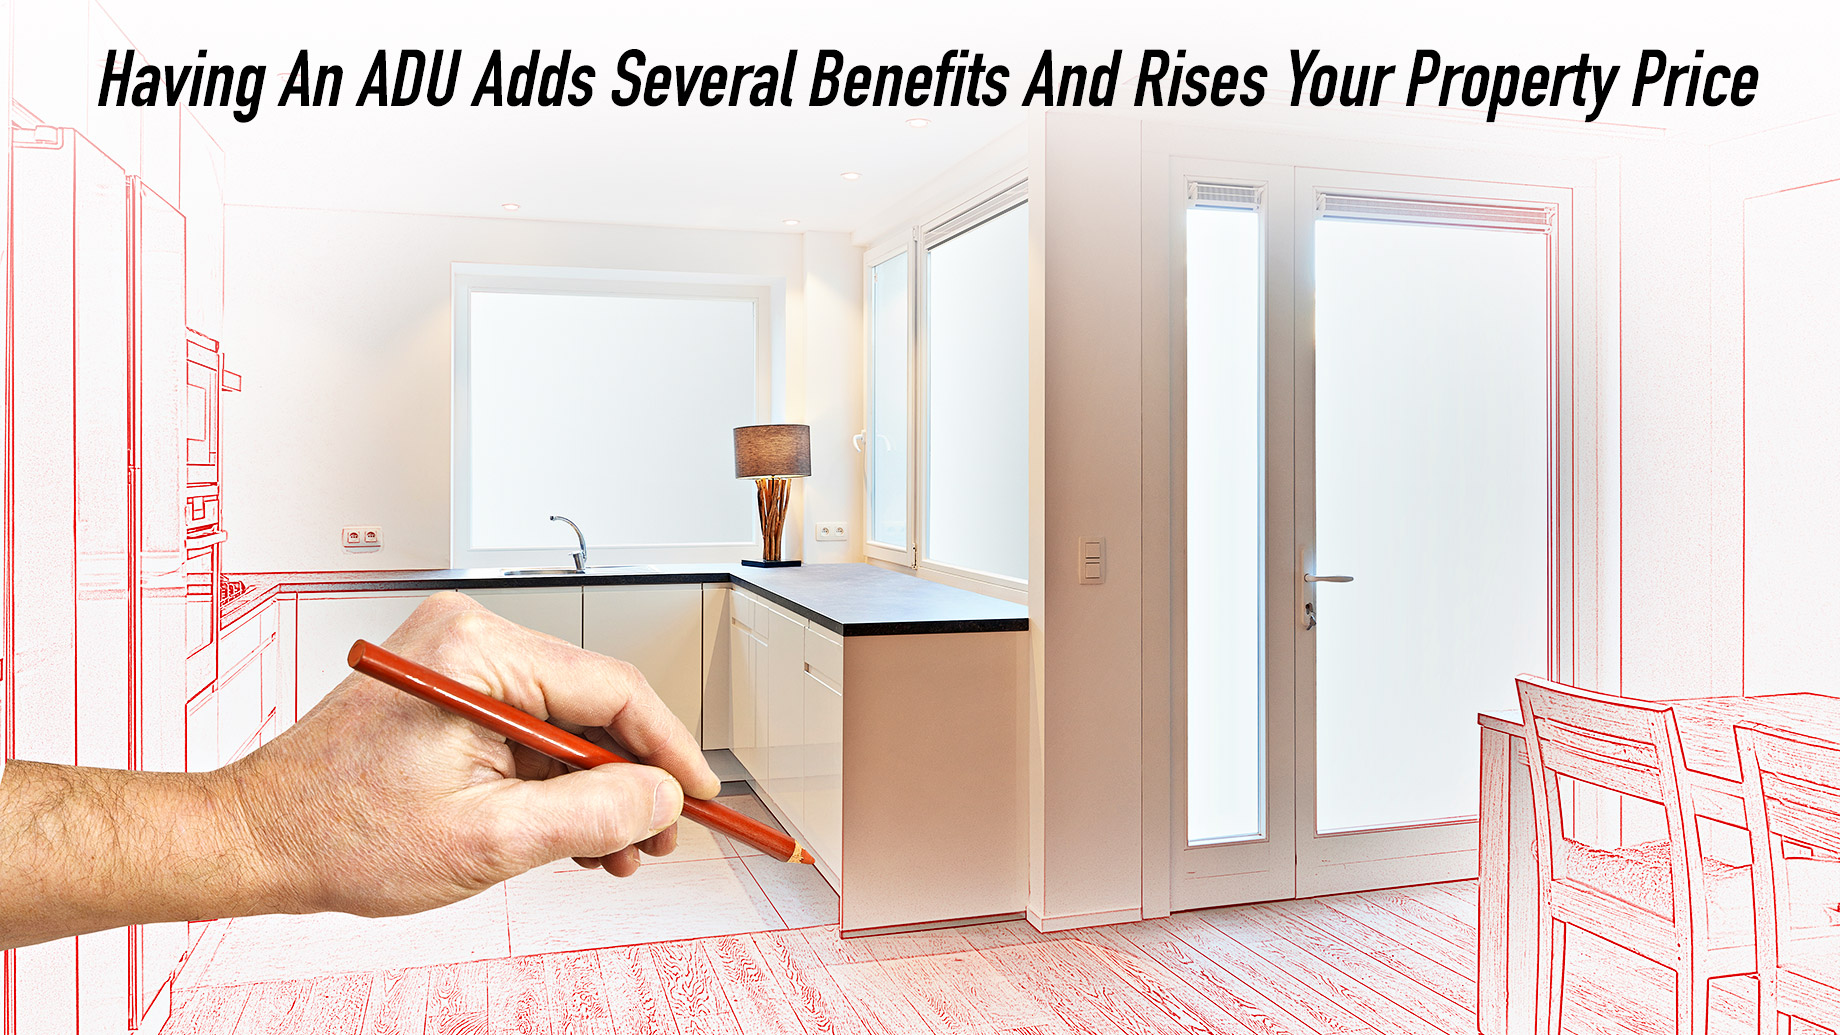 Having An ADU Adds Several Benefits And Rises Your Property Price